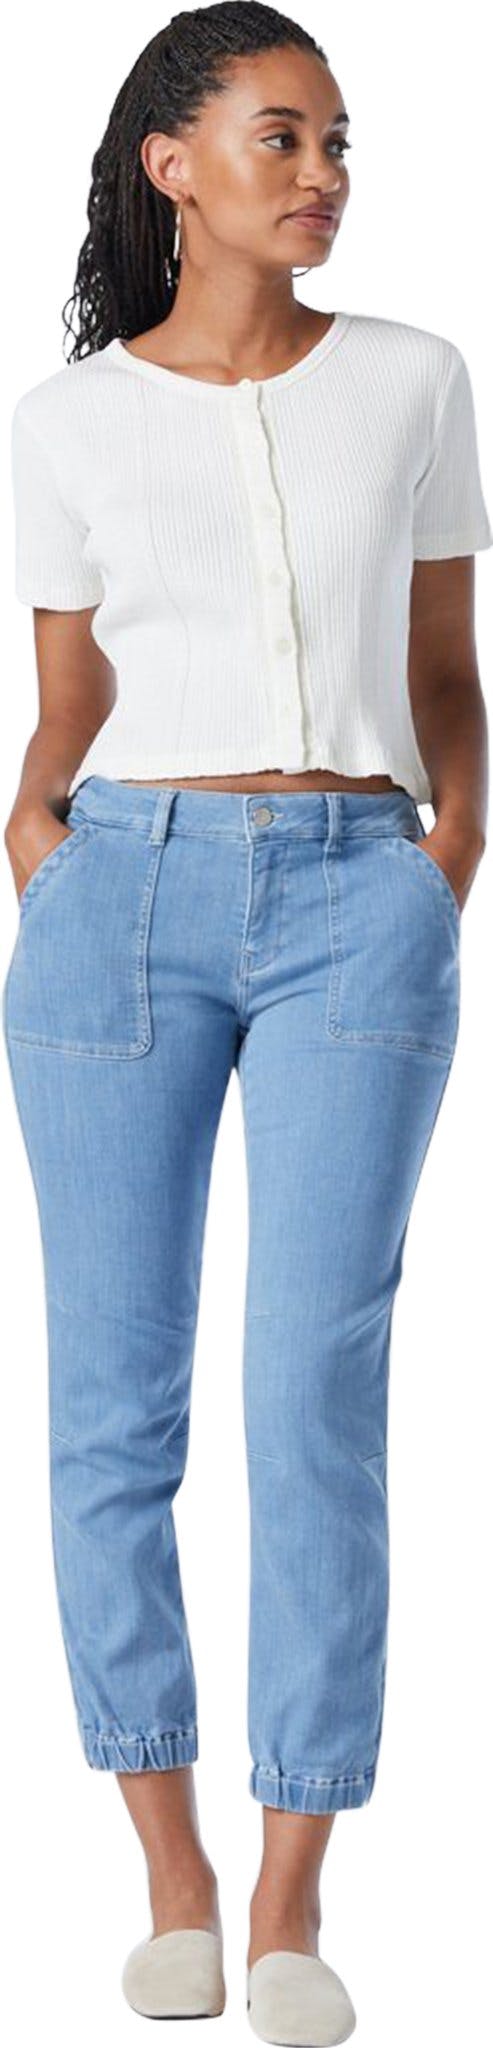 Product image for Ivy Slim Fit Denim Pant - Women's